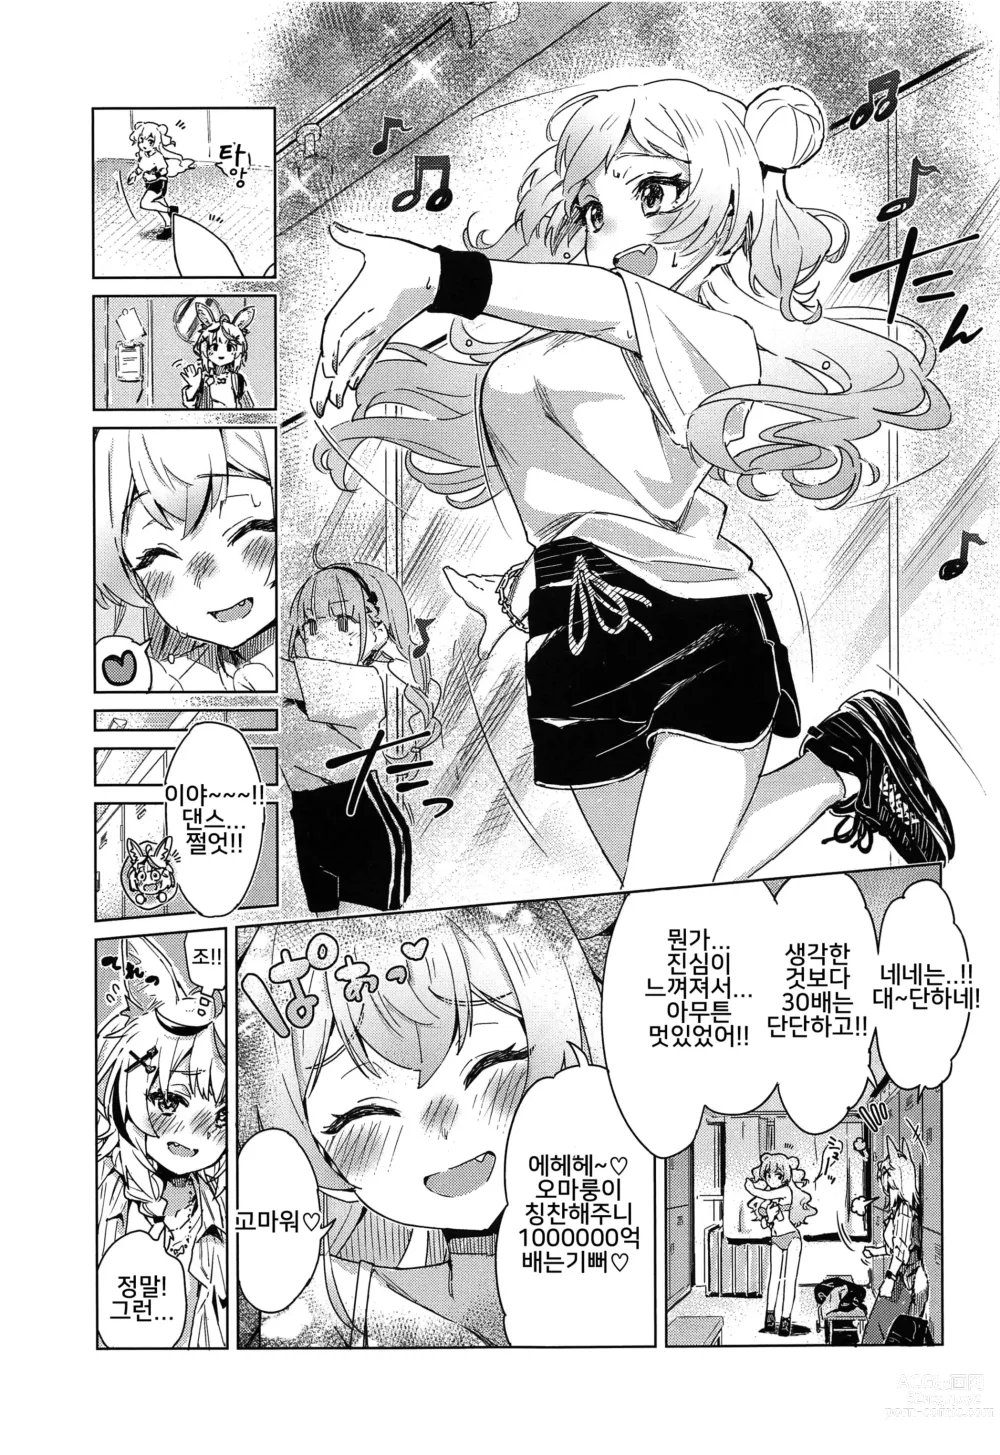 Page 6 of doujinshi Fennec wa Iseijin no Yume o Miru ka - Does The Fennec Dream of The Lovely Visitor?